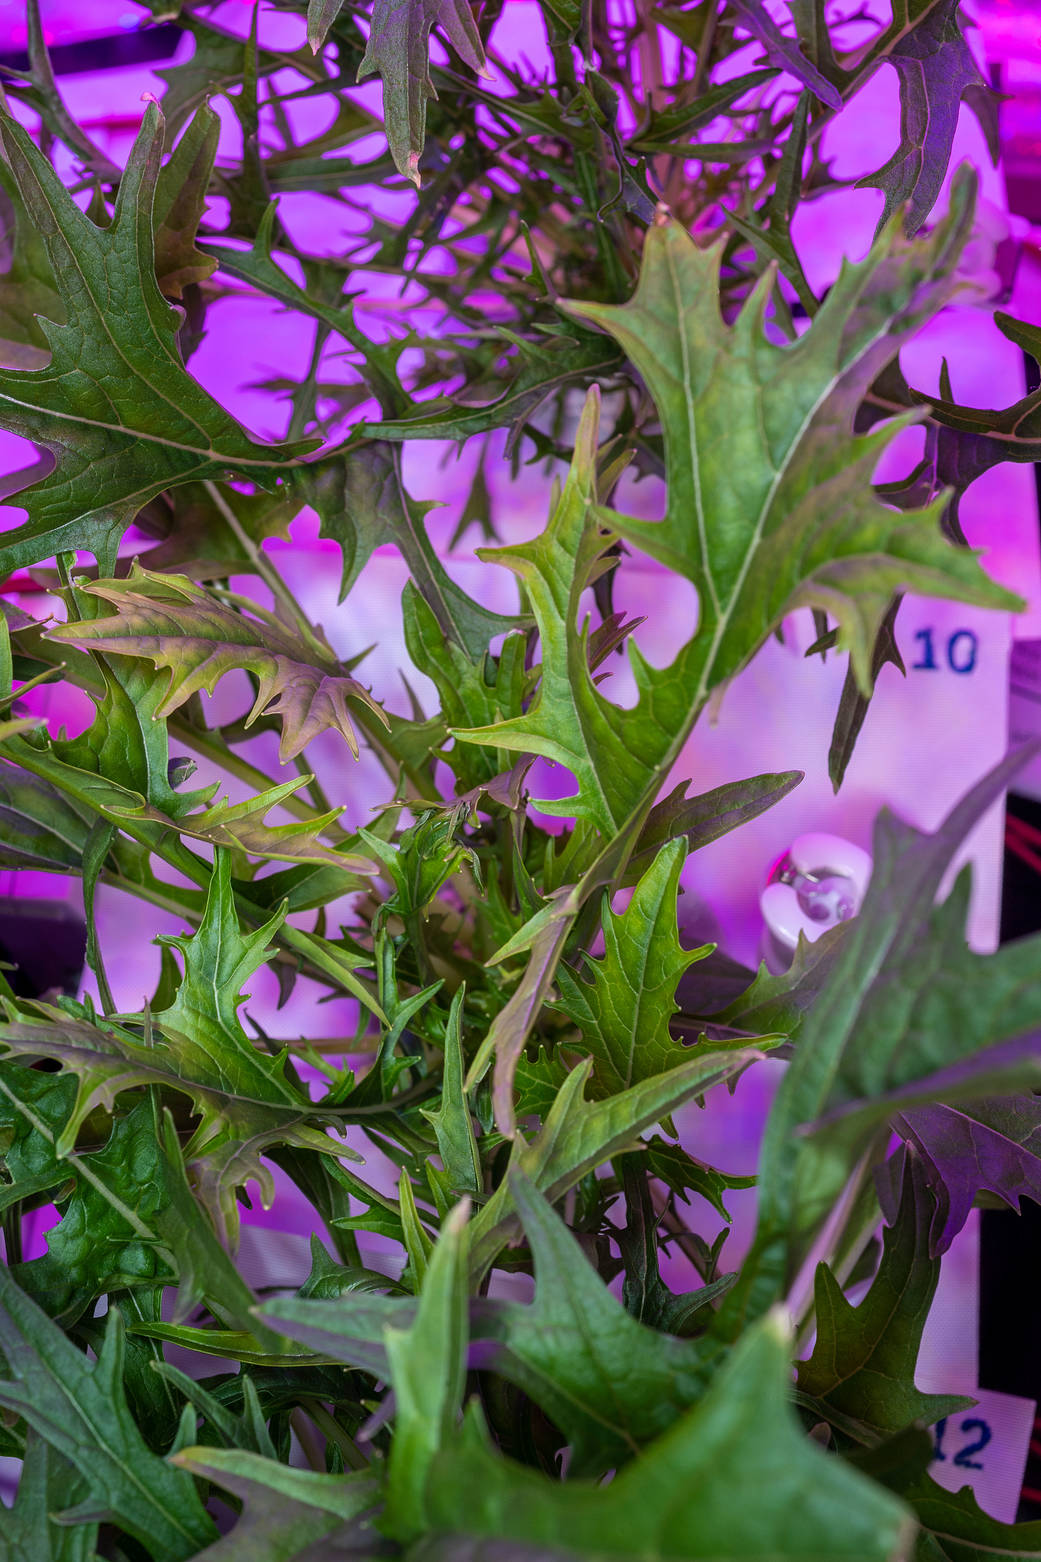 Mizuna mustard greens are growing aboard the International Space Station